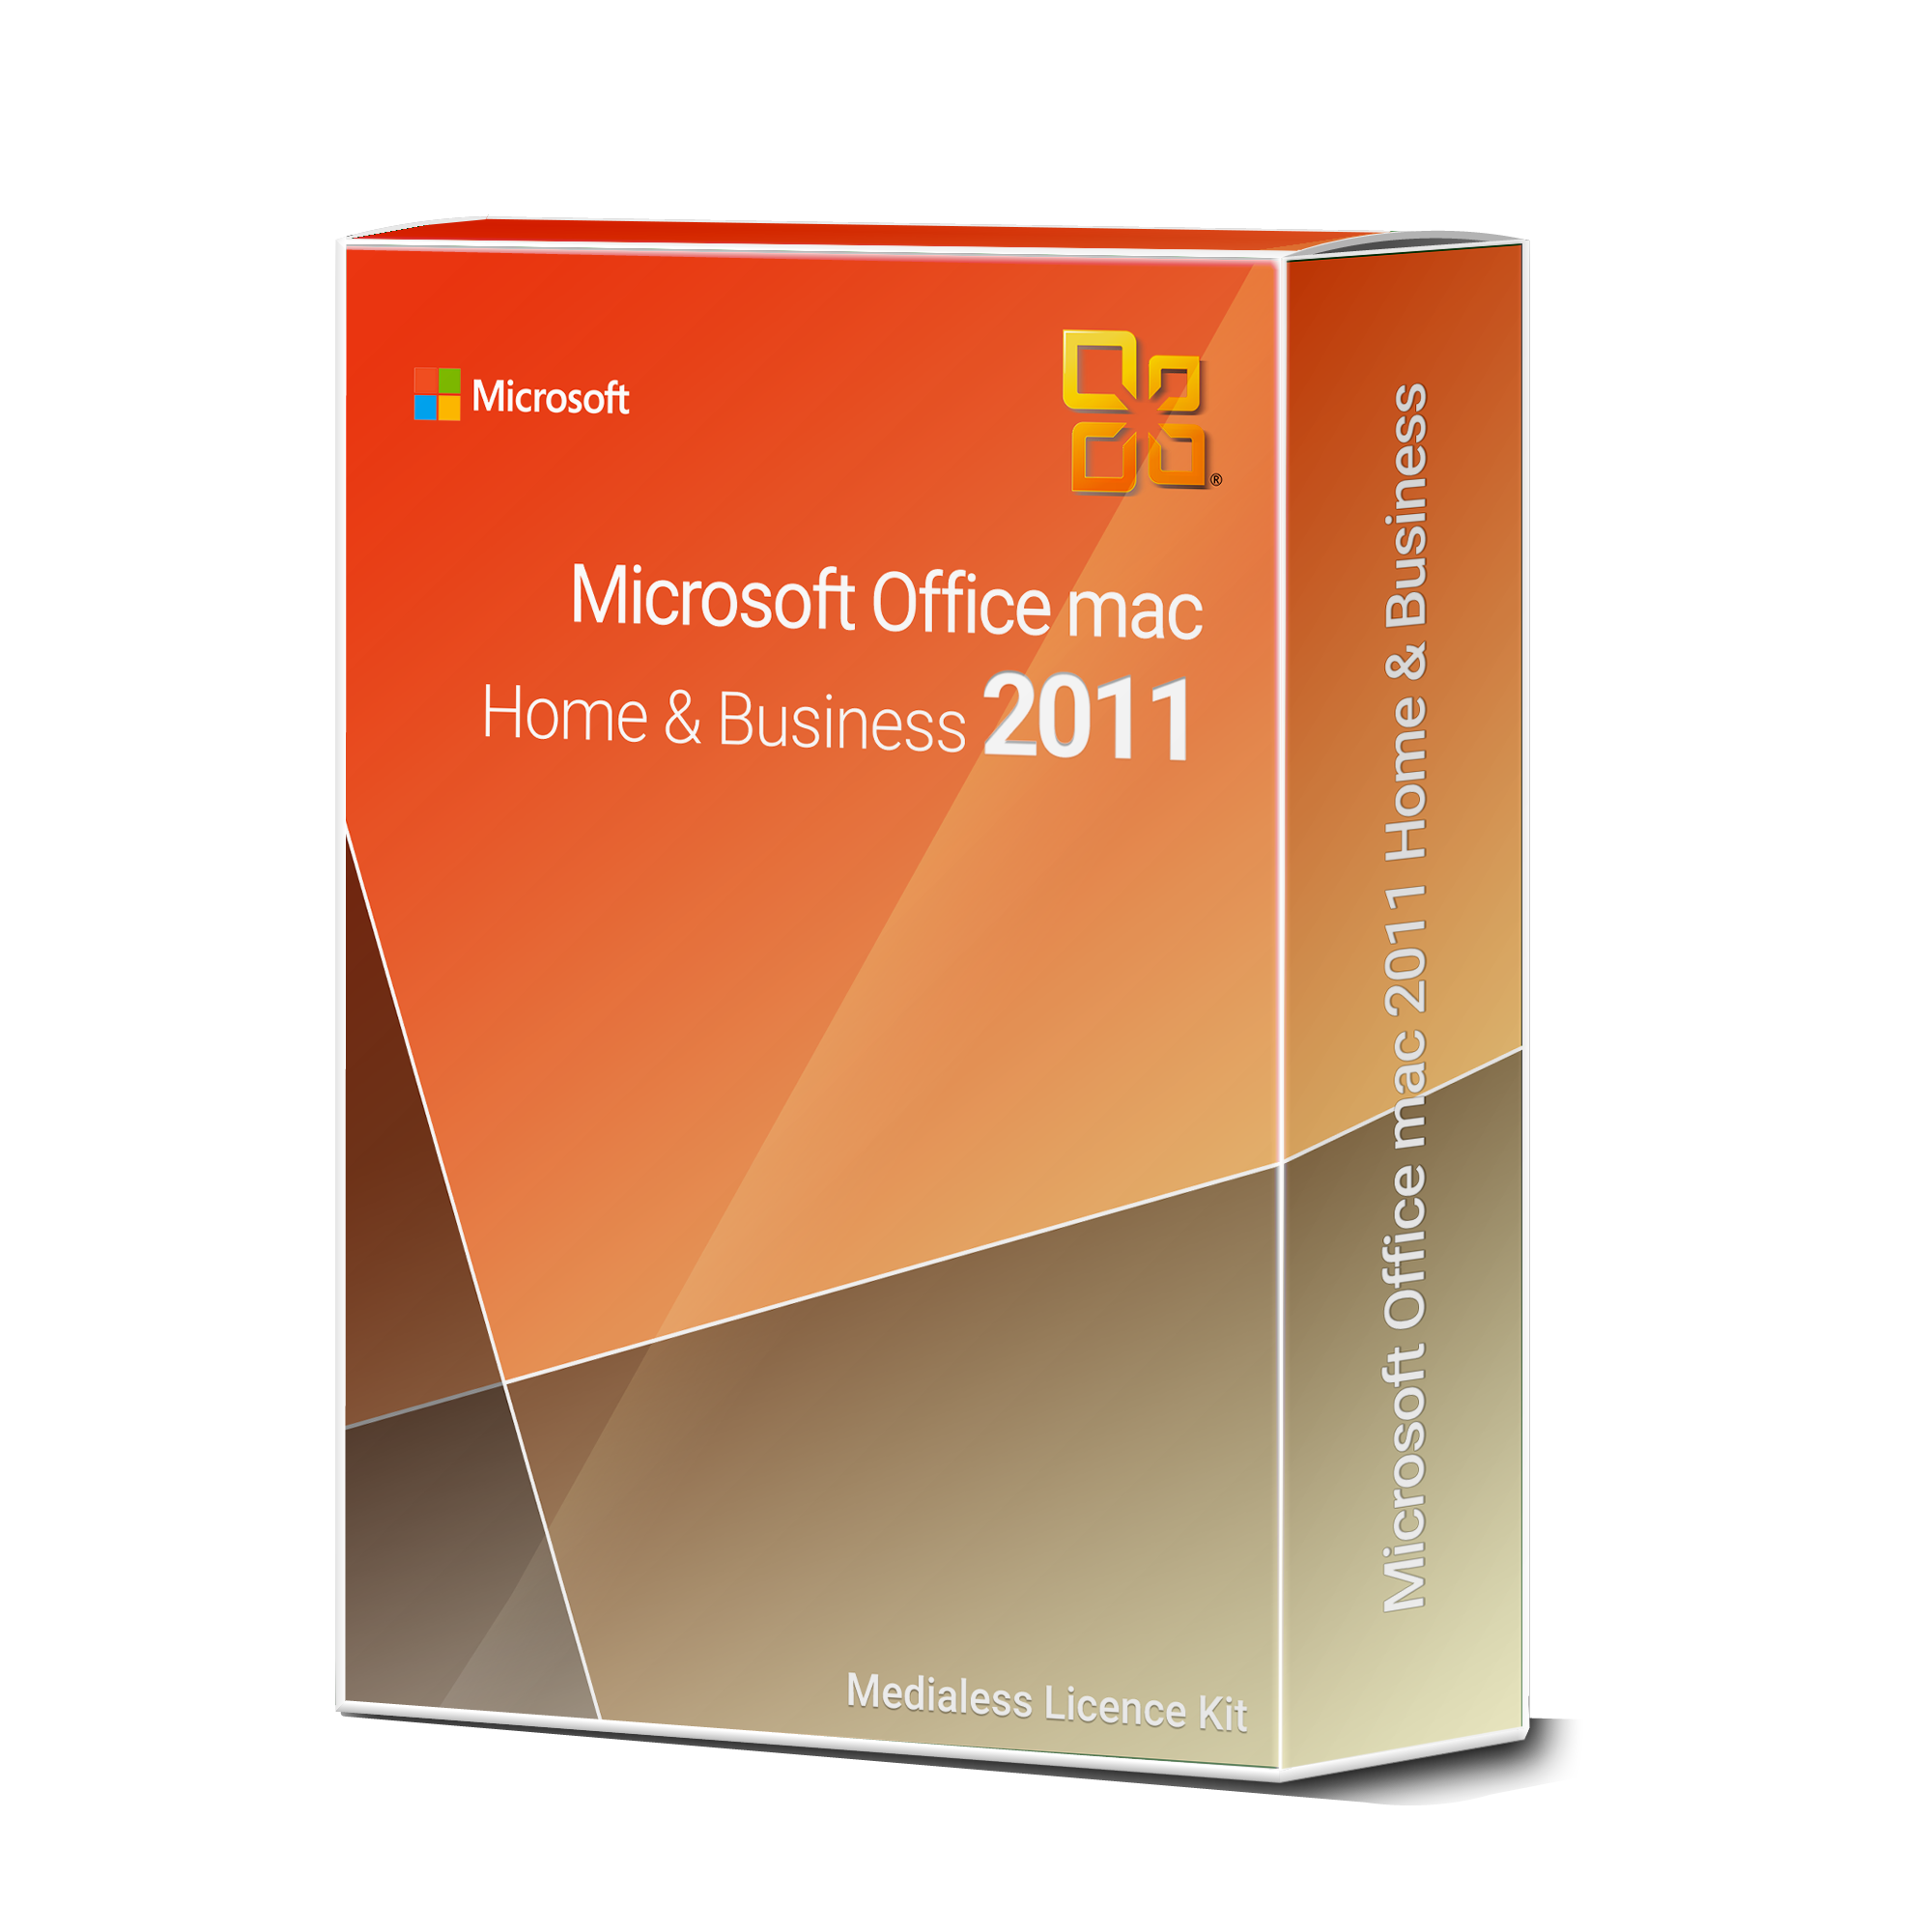 MS Office 2011 Home and Business mac